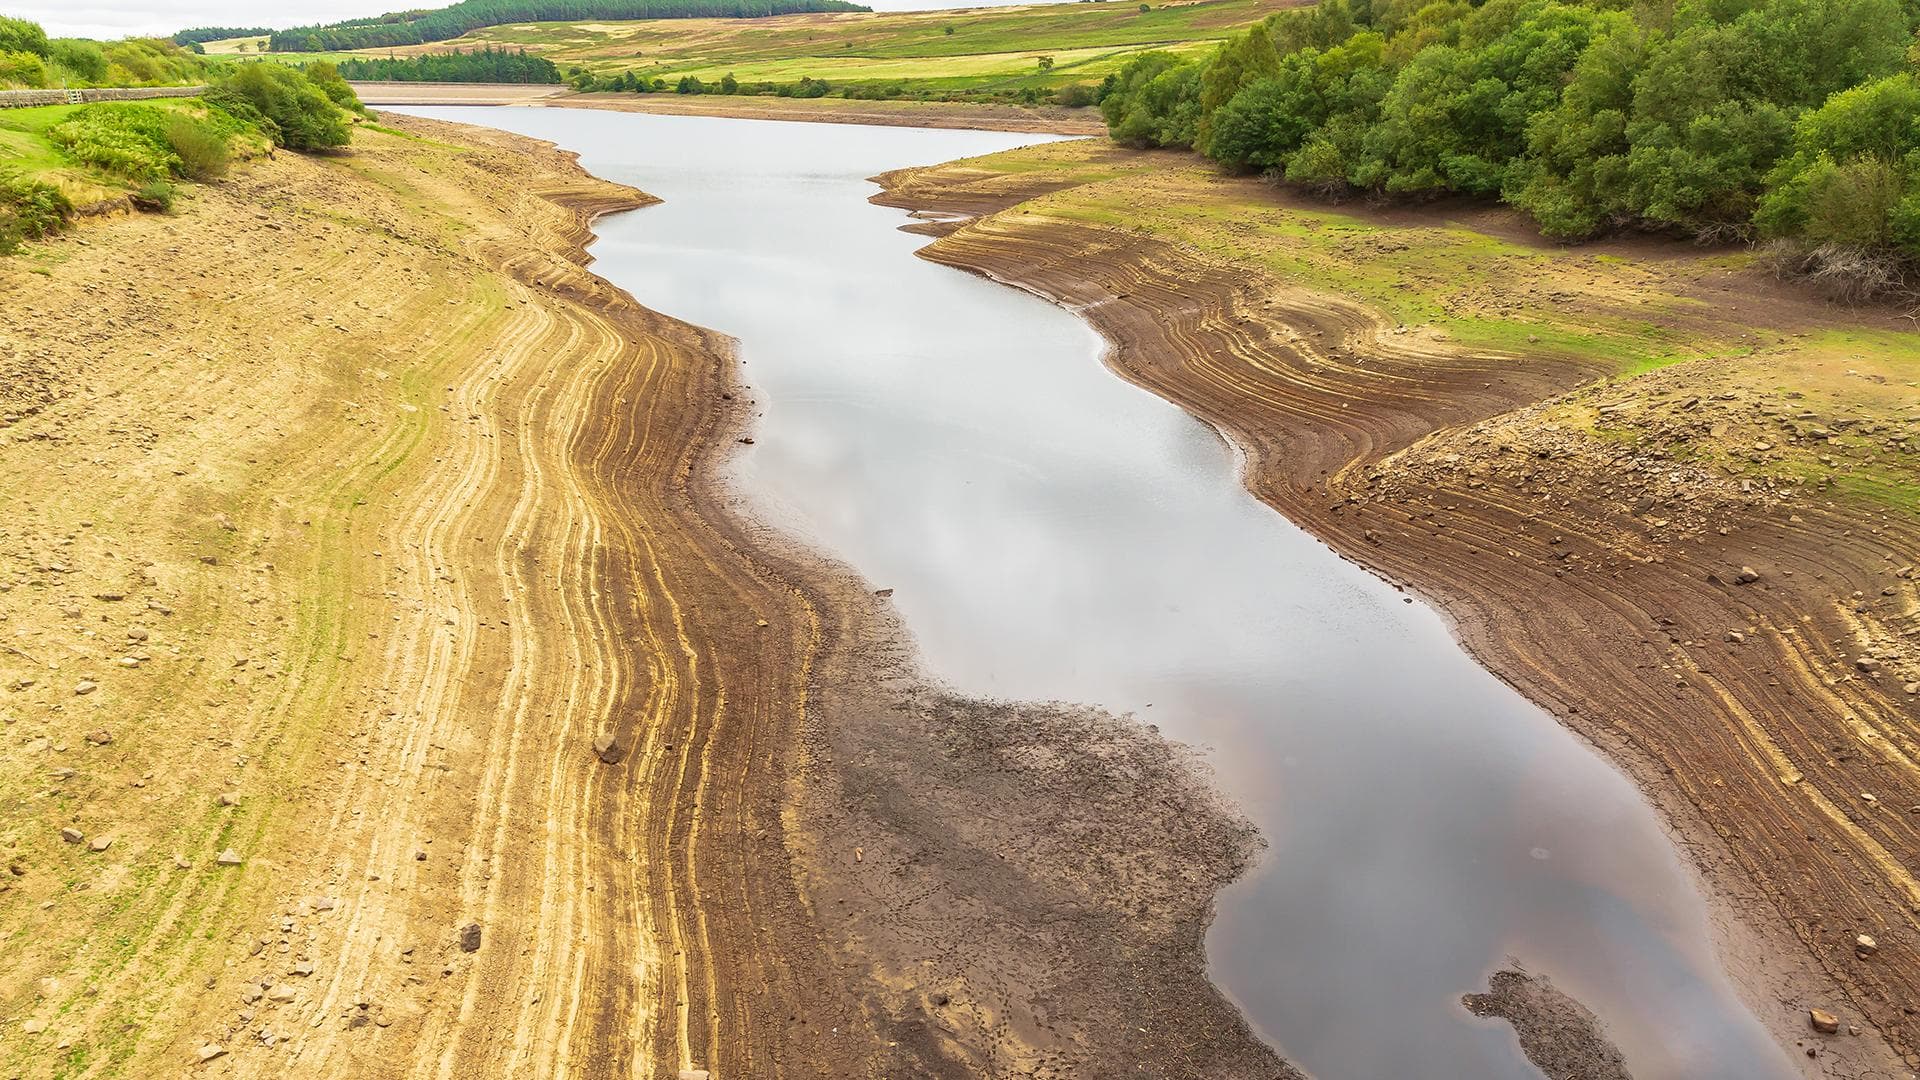 Leighton Reservoir in Nidderdale, North Yorkshire, UK, with very low water levels following a prolonged heatwave and no rainfall.